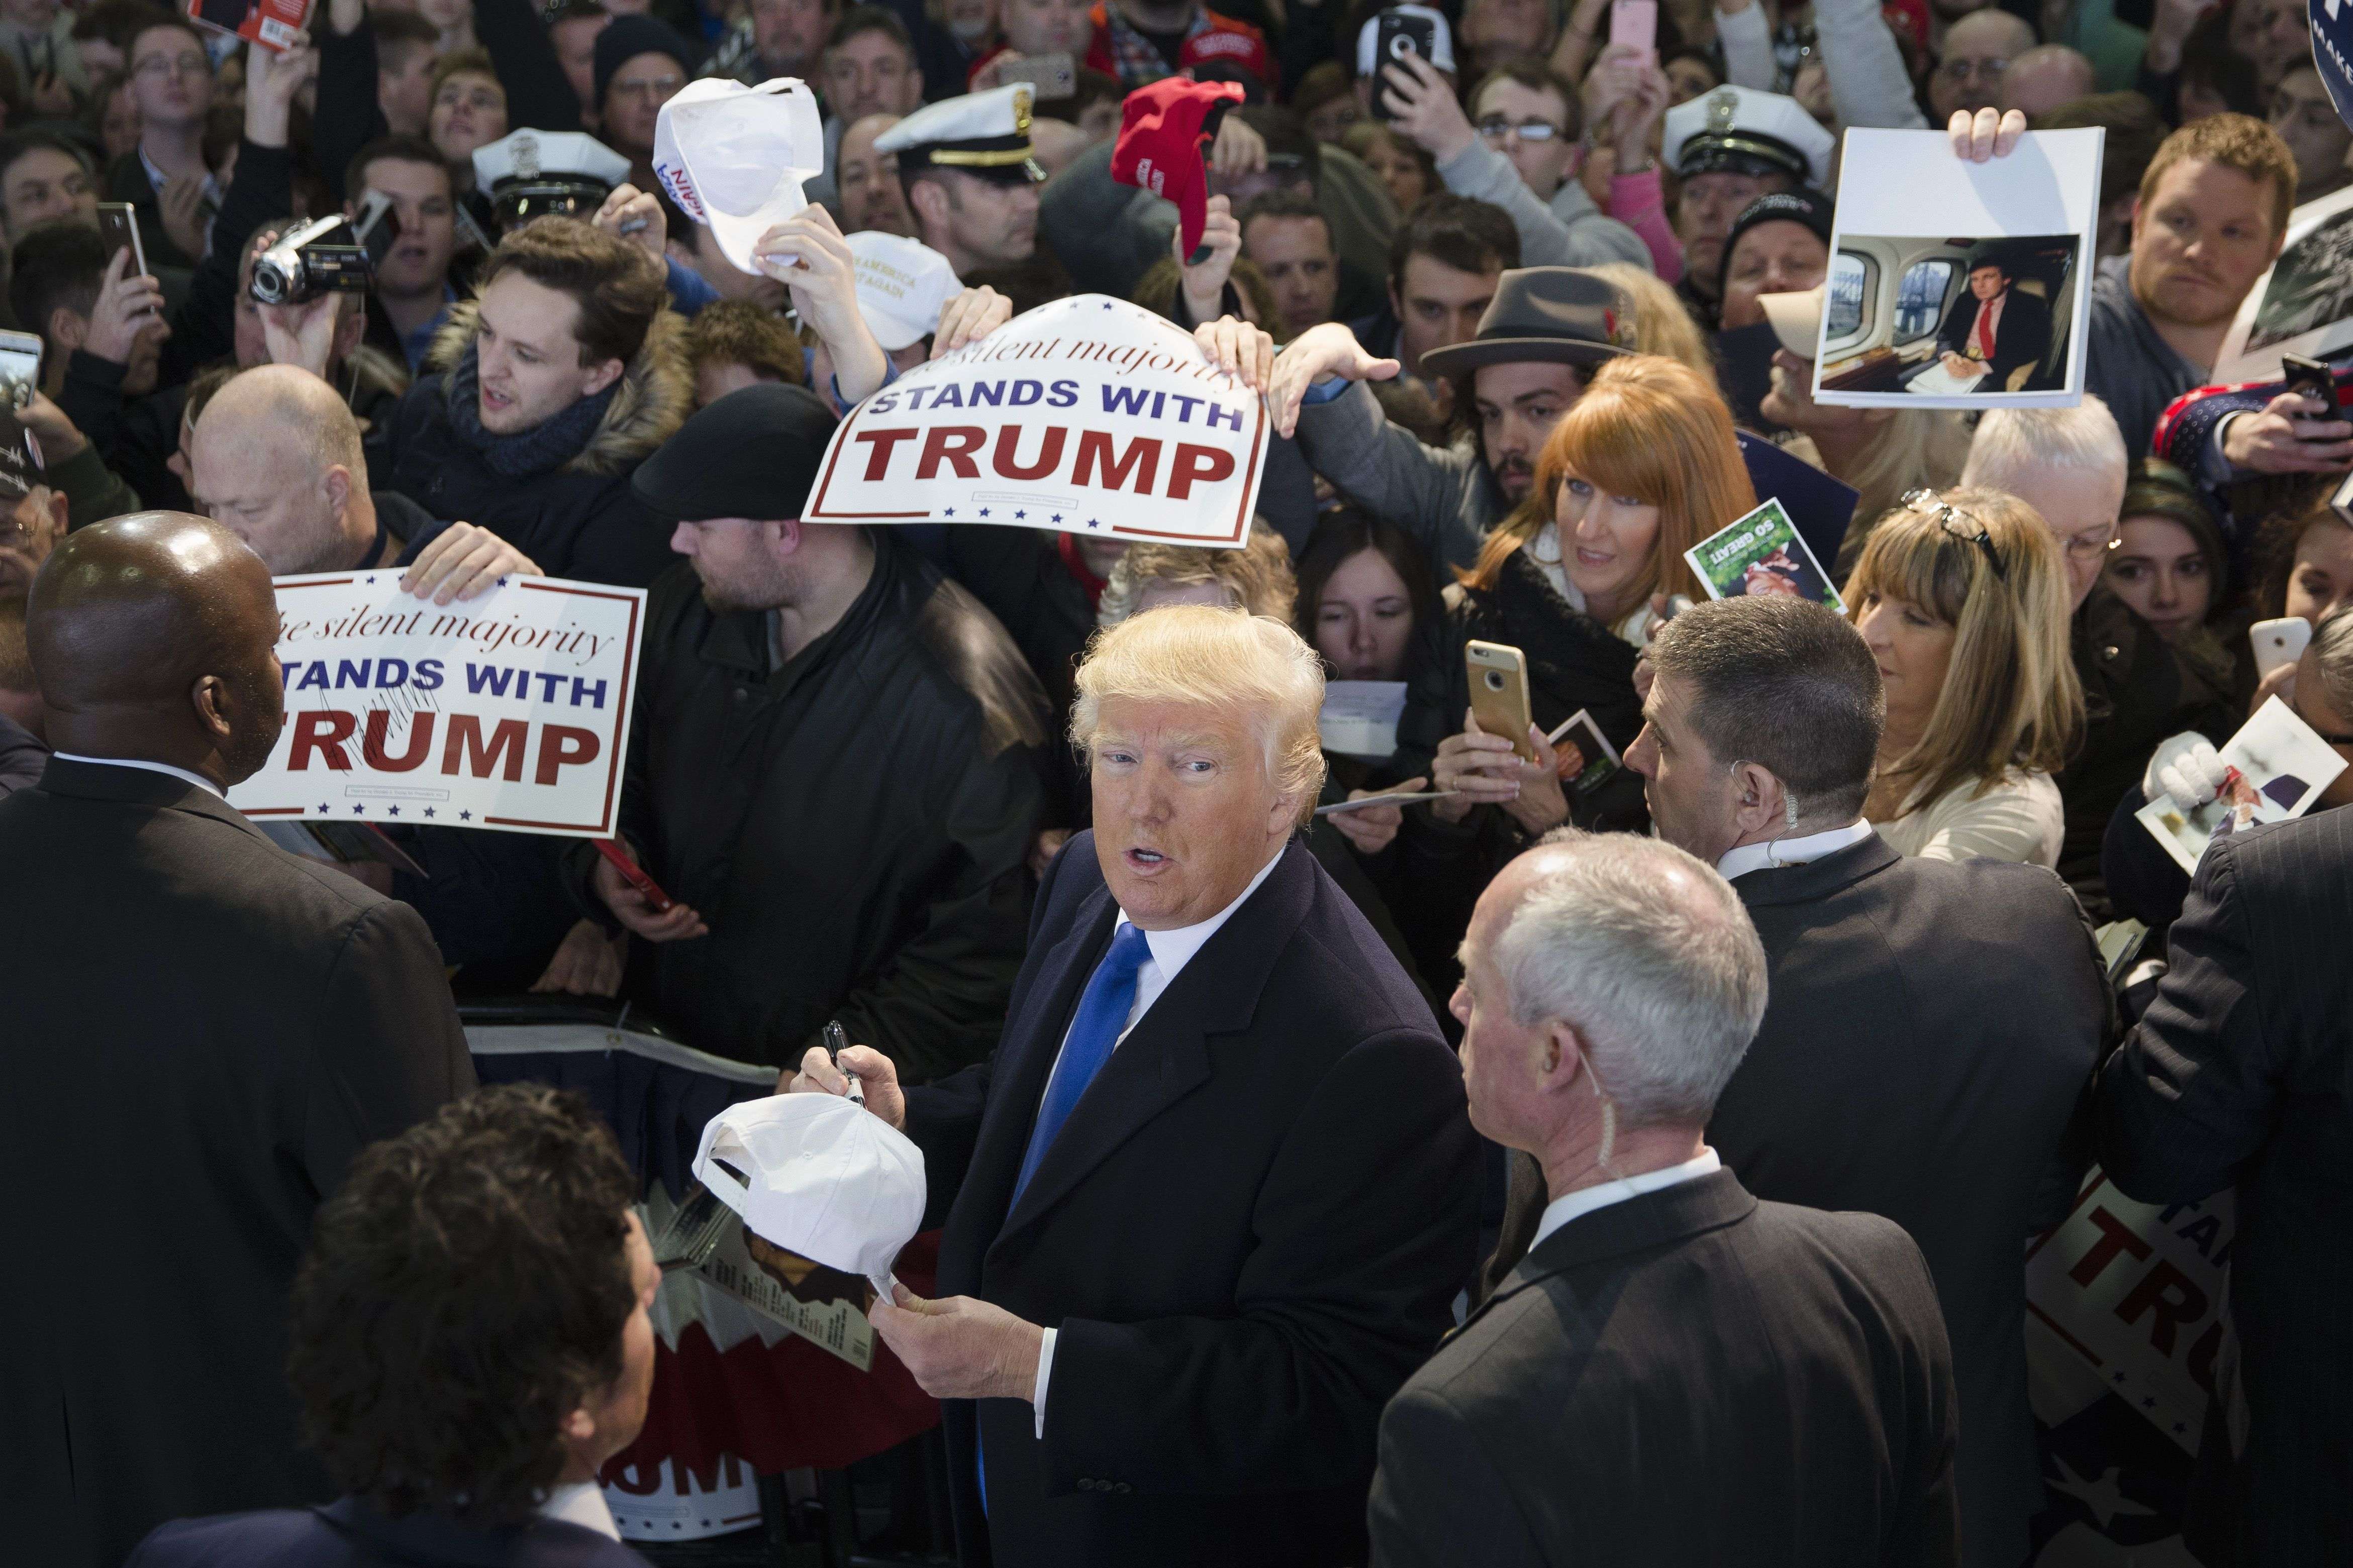 Republican presidential candidate Donald Trump signs autographs during a campaign stop at the Signature Flight Hangar at Port-Columbus International Airport, Tuesday, March 1, 2016, in Columbus, Ohio. (AP Photo/John Minchillo)